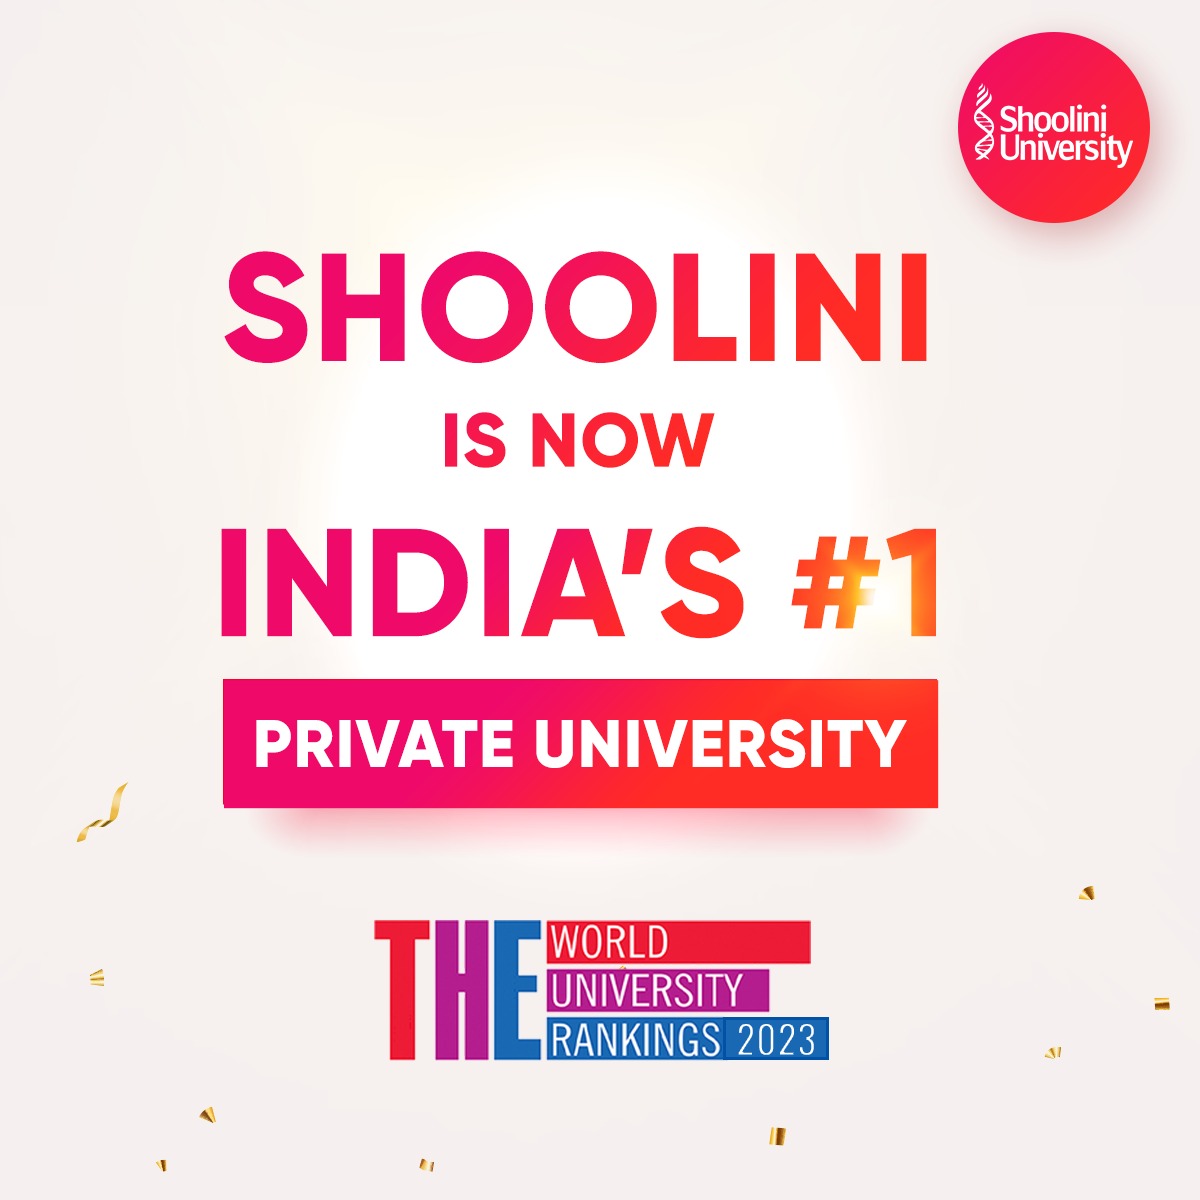 Shoolini is No.1 Private University in India